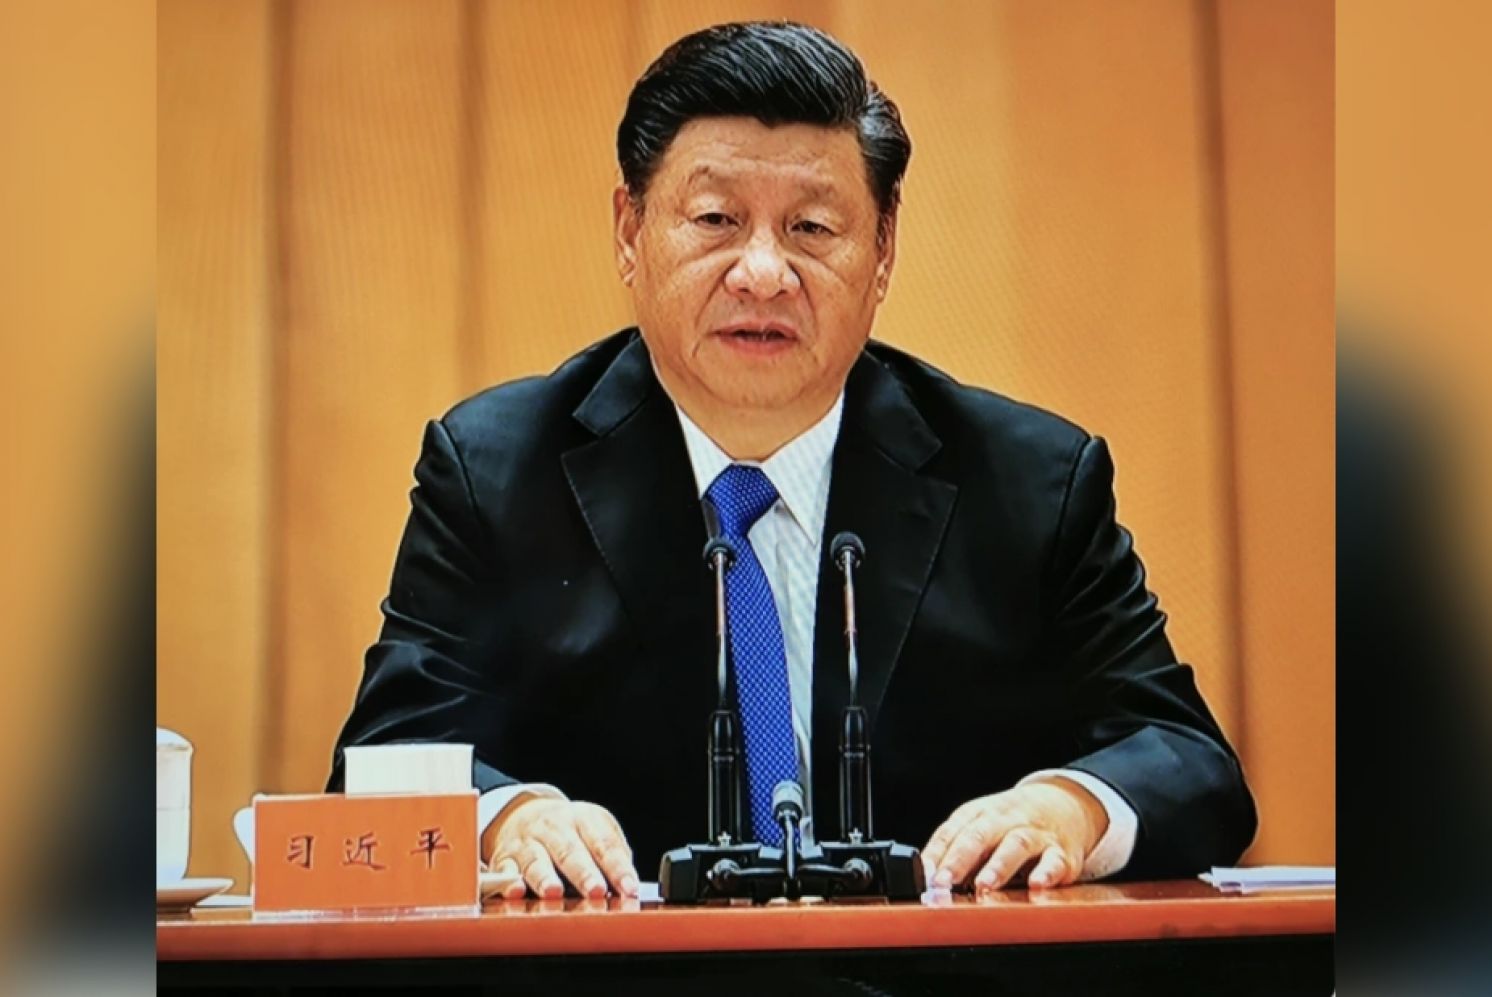 Xi Attempts to Ease Tensions, Assuage Hawks on Taiwan